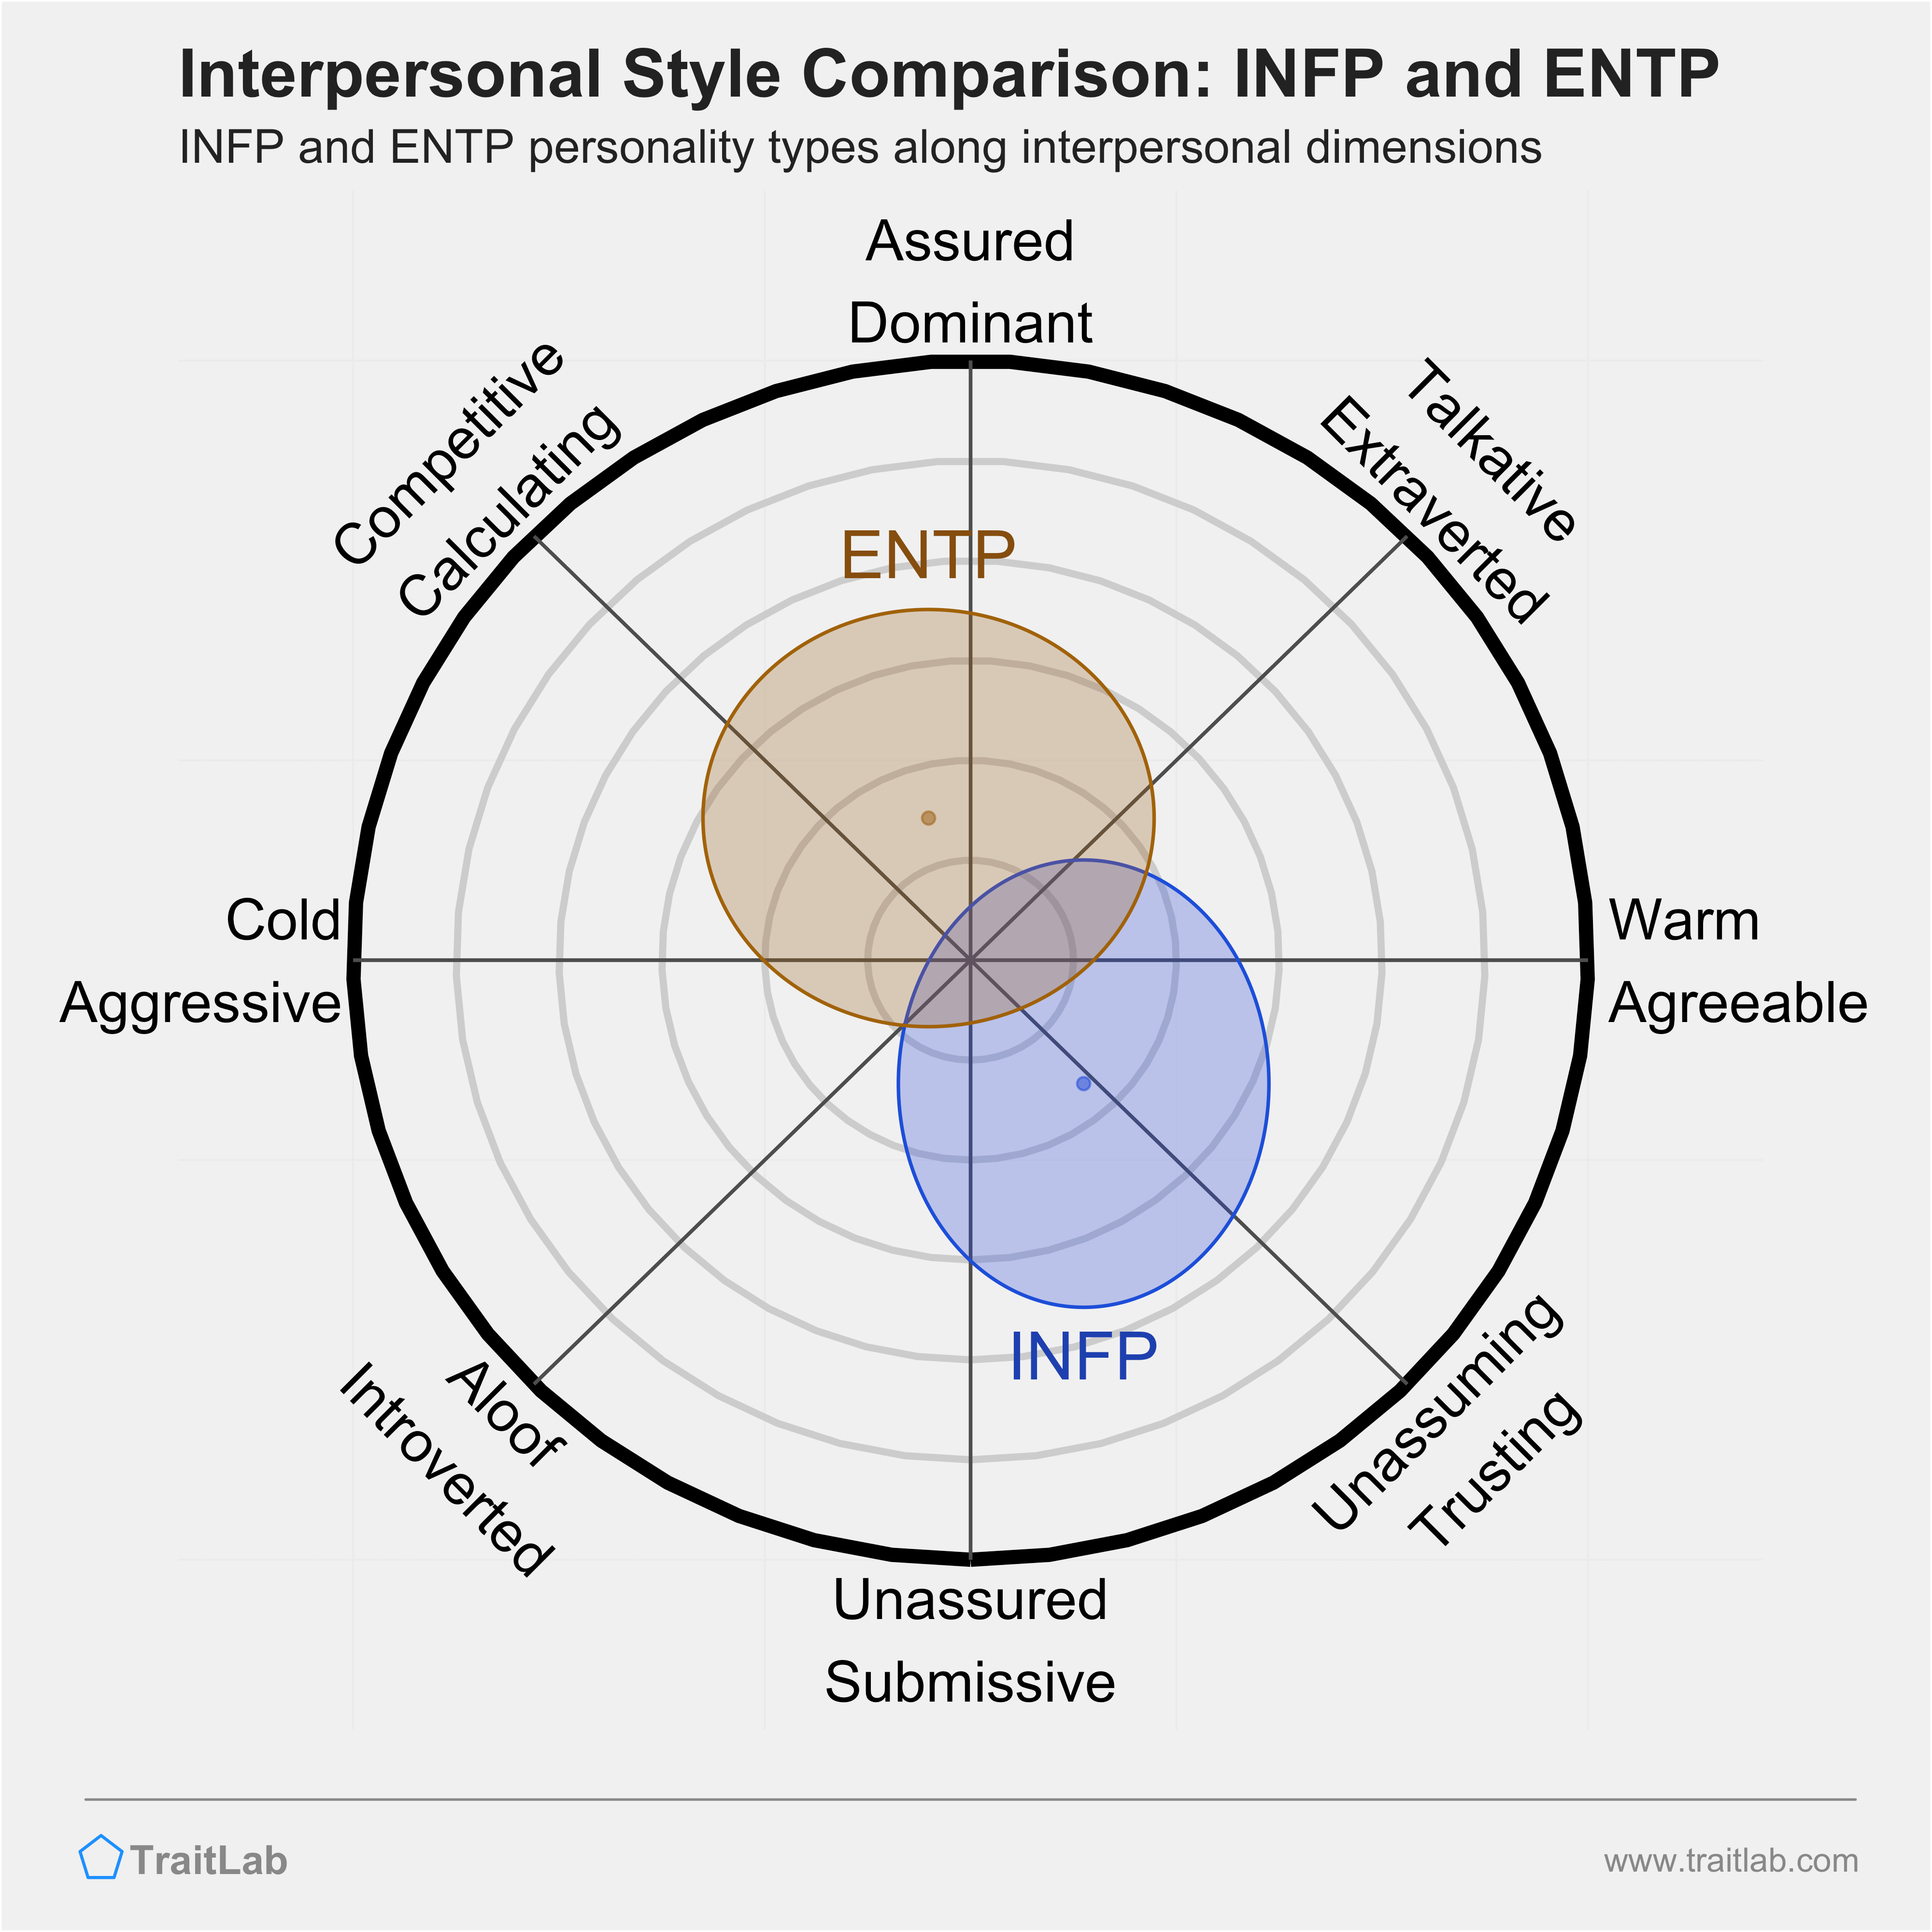 INFP and ENTP comparison across interpersonal dimensions